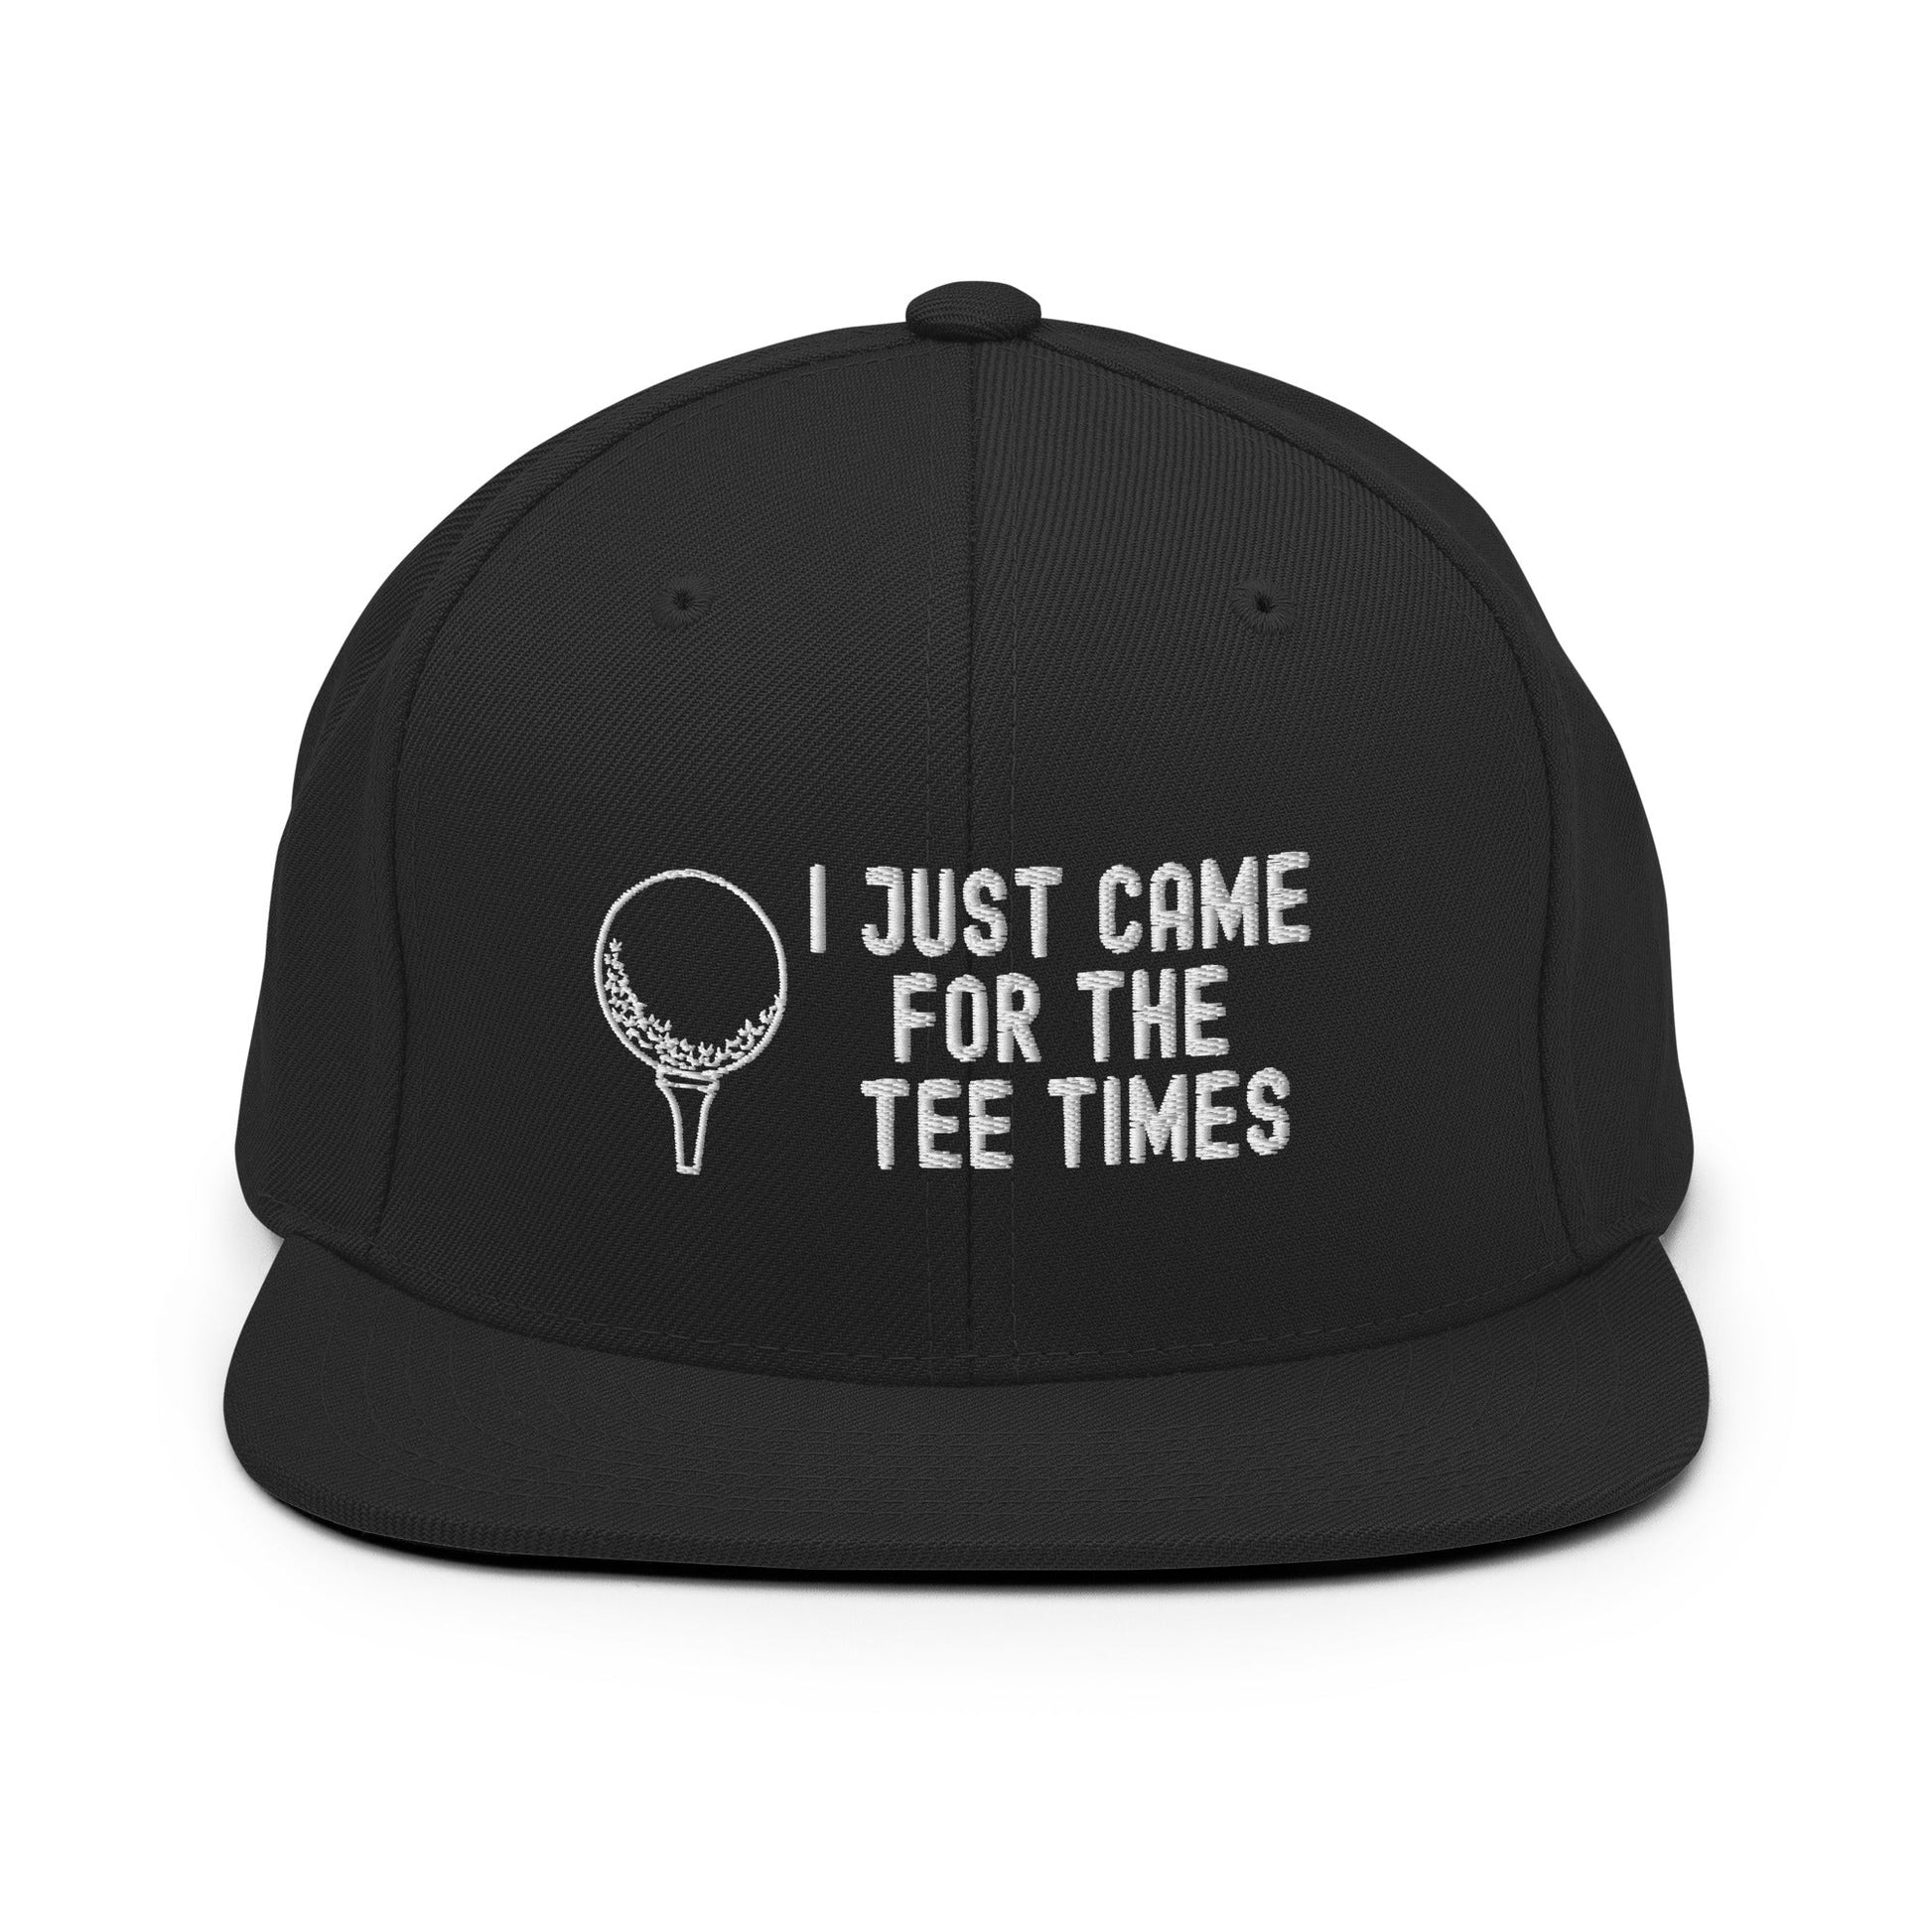 Funny Golfer Gifts  Snapback Hat Black I Just Came For The Tee Times Snapback Hat